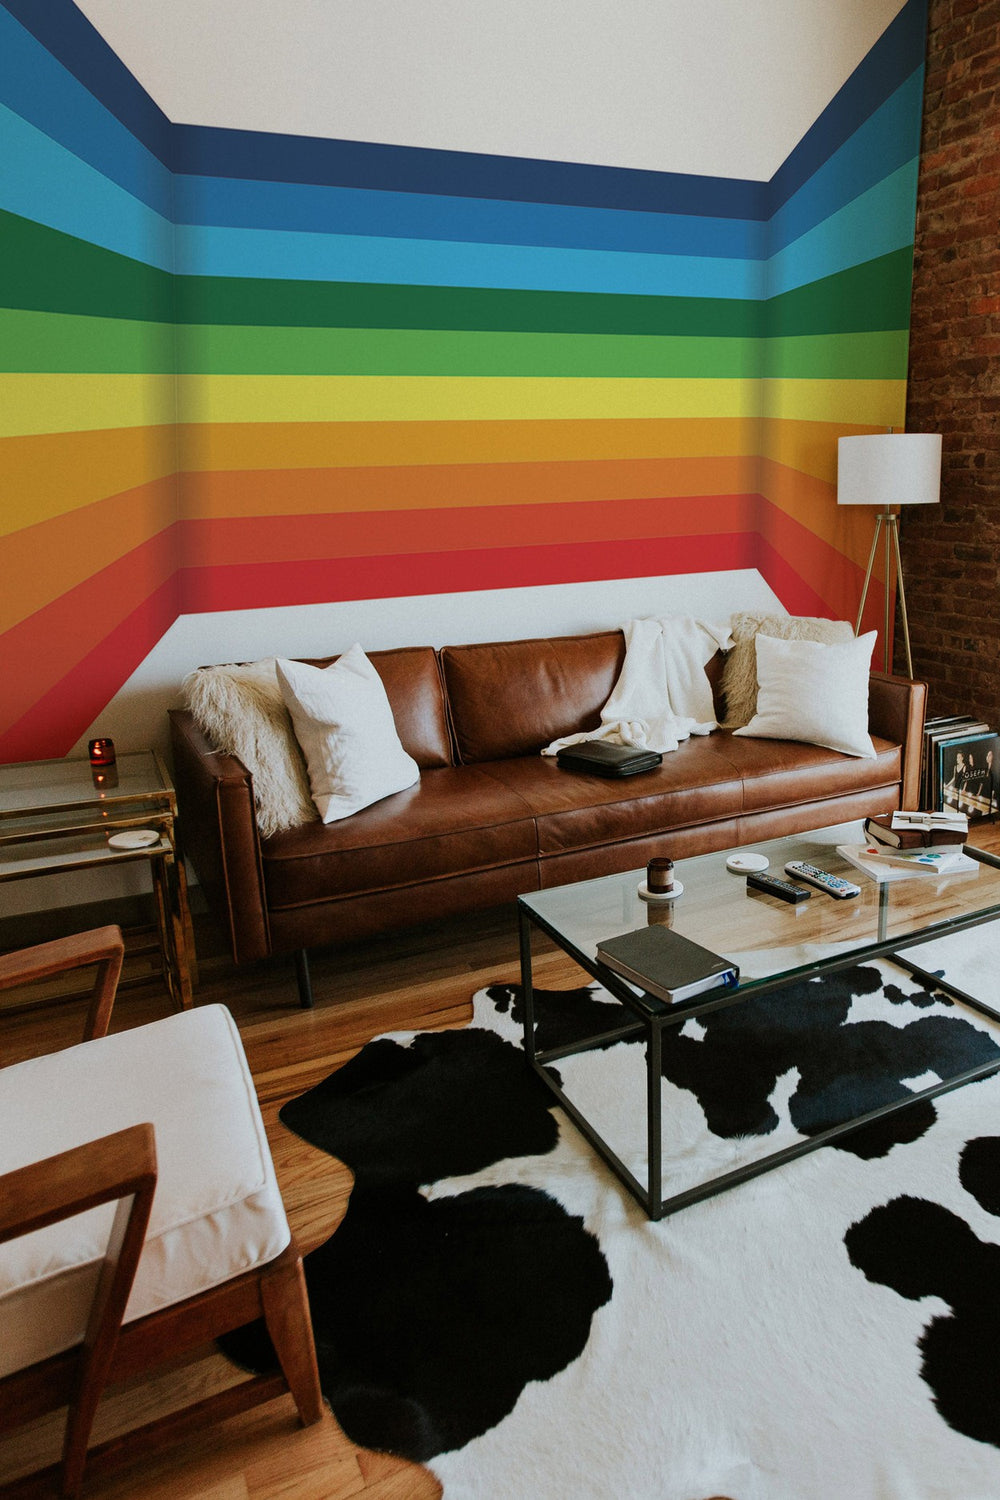 A cozy living room with a vibrant rainbow-striped wall mural, leather sofa, and modern furniture.